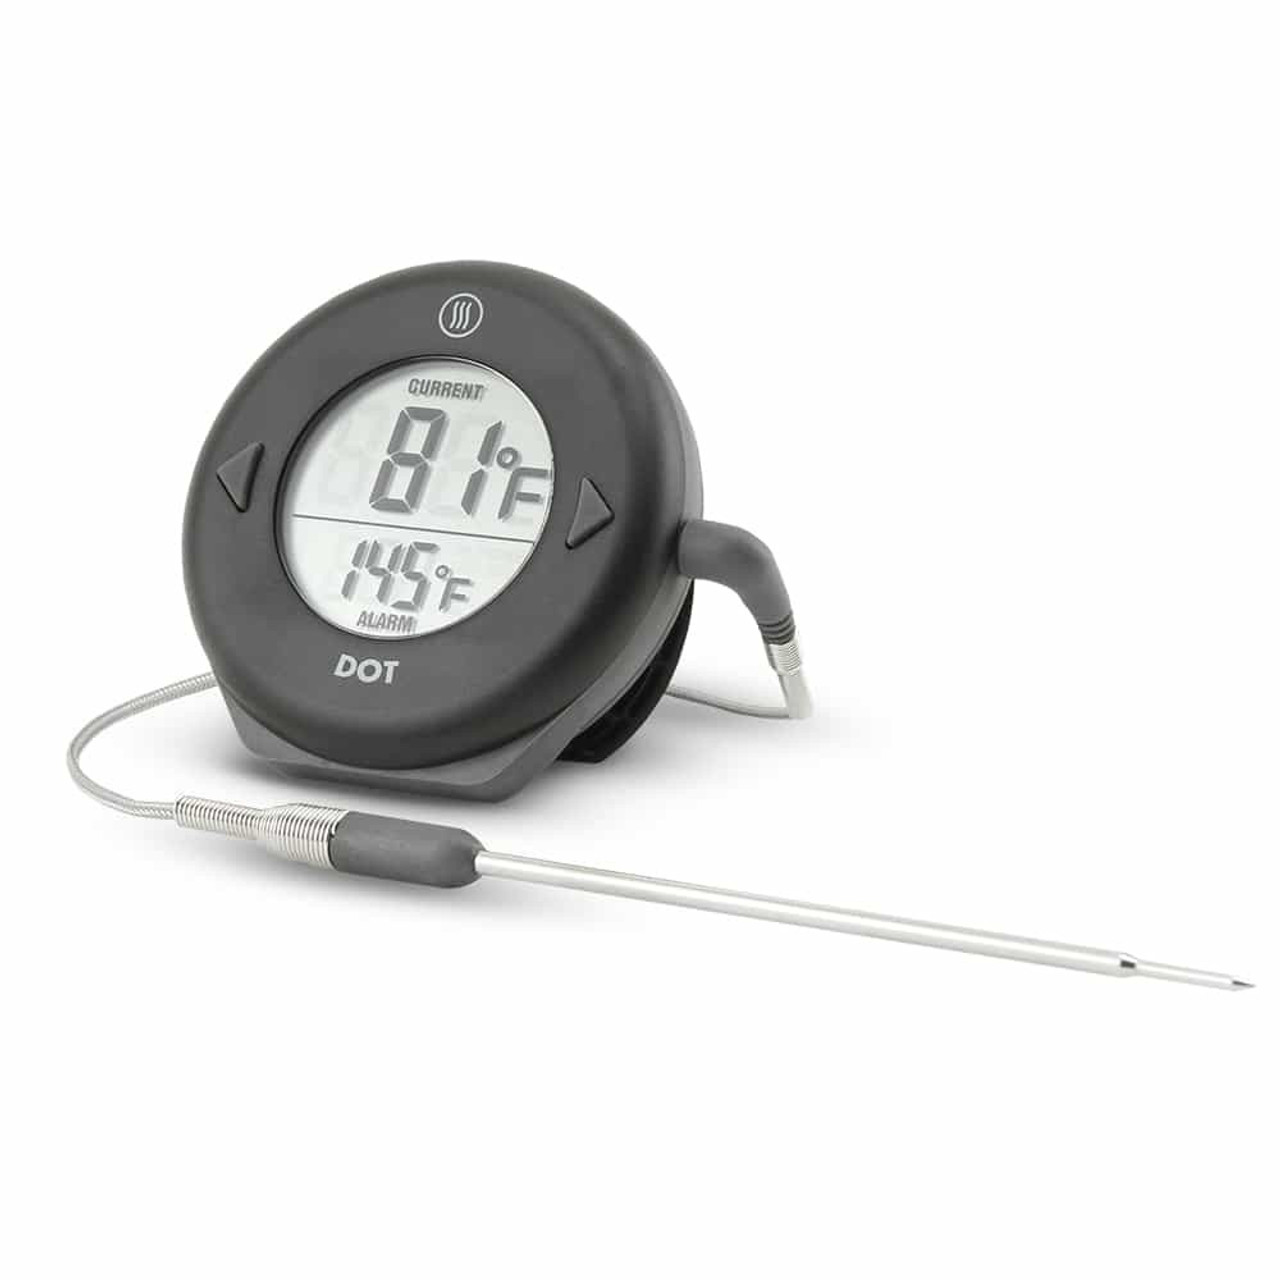 Thermoworks Dot Review 